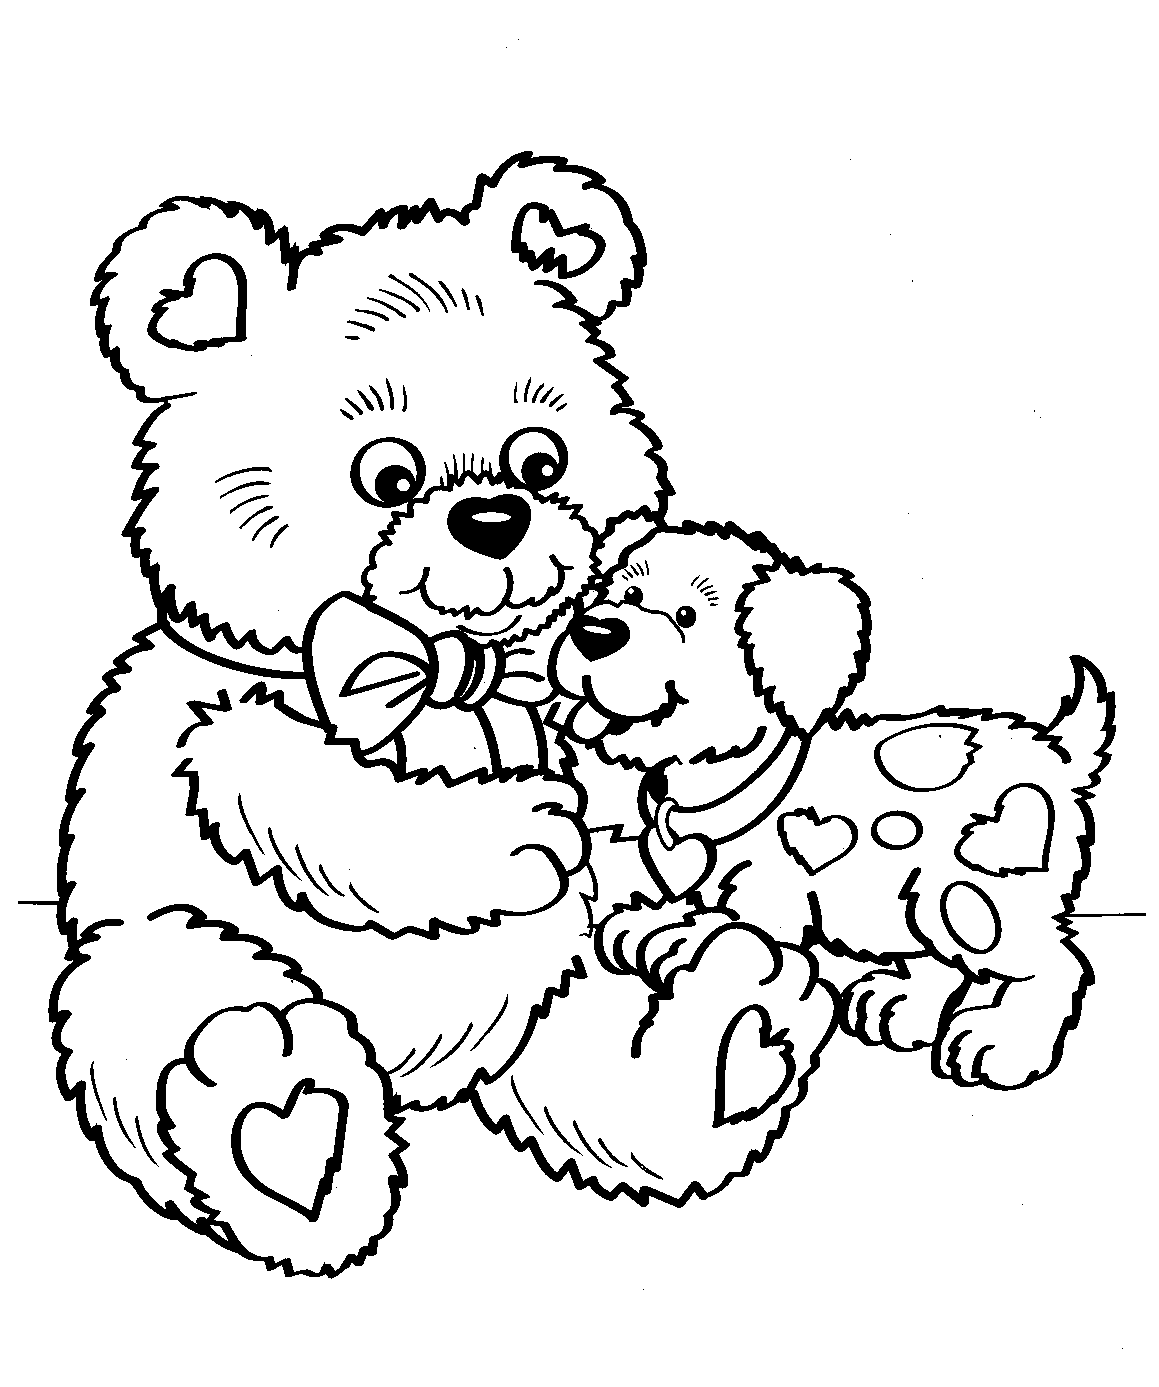 Download Coloring Pages: Hearts Free Printable Coloring Pages for ...